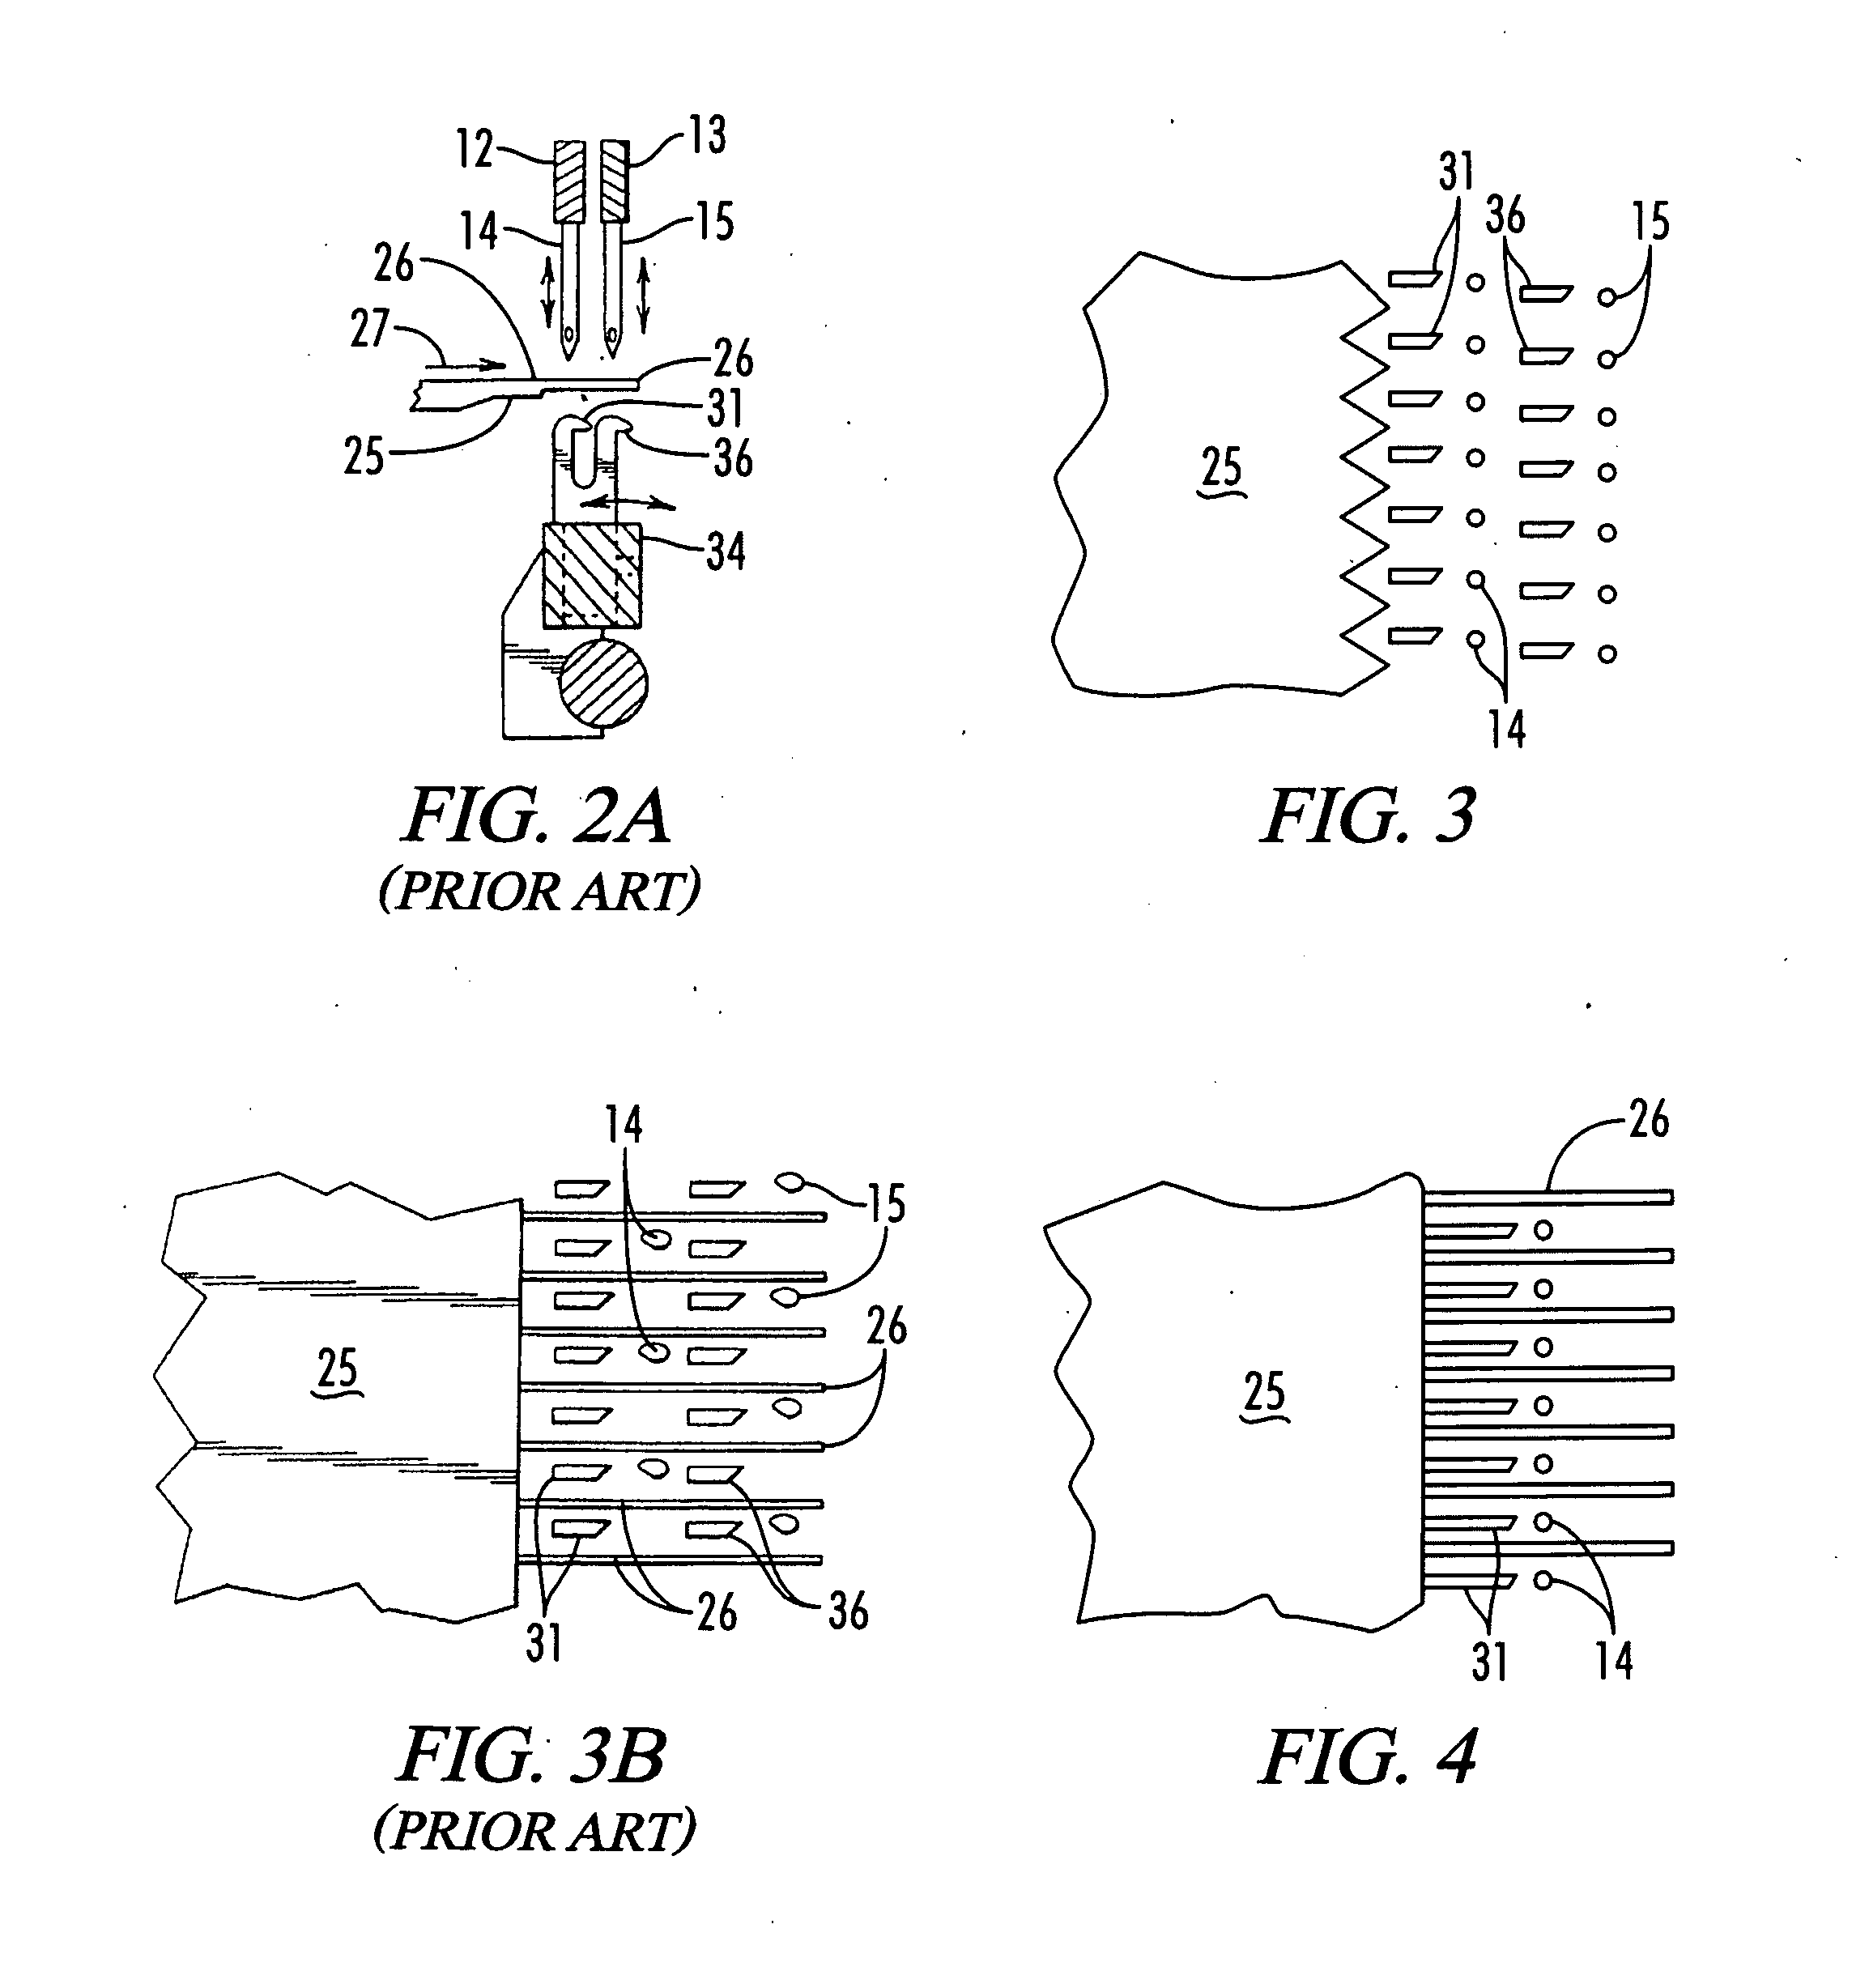 Method for Selective Display of Yarn in a Tufted Fabric With Double End Yarn Drives